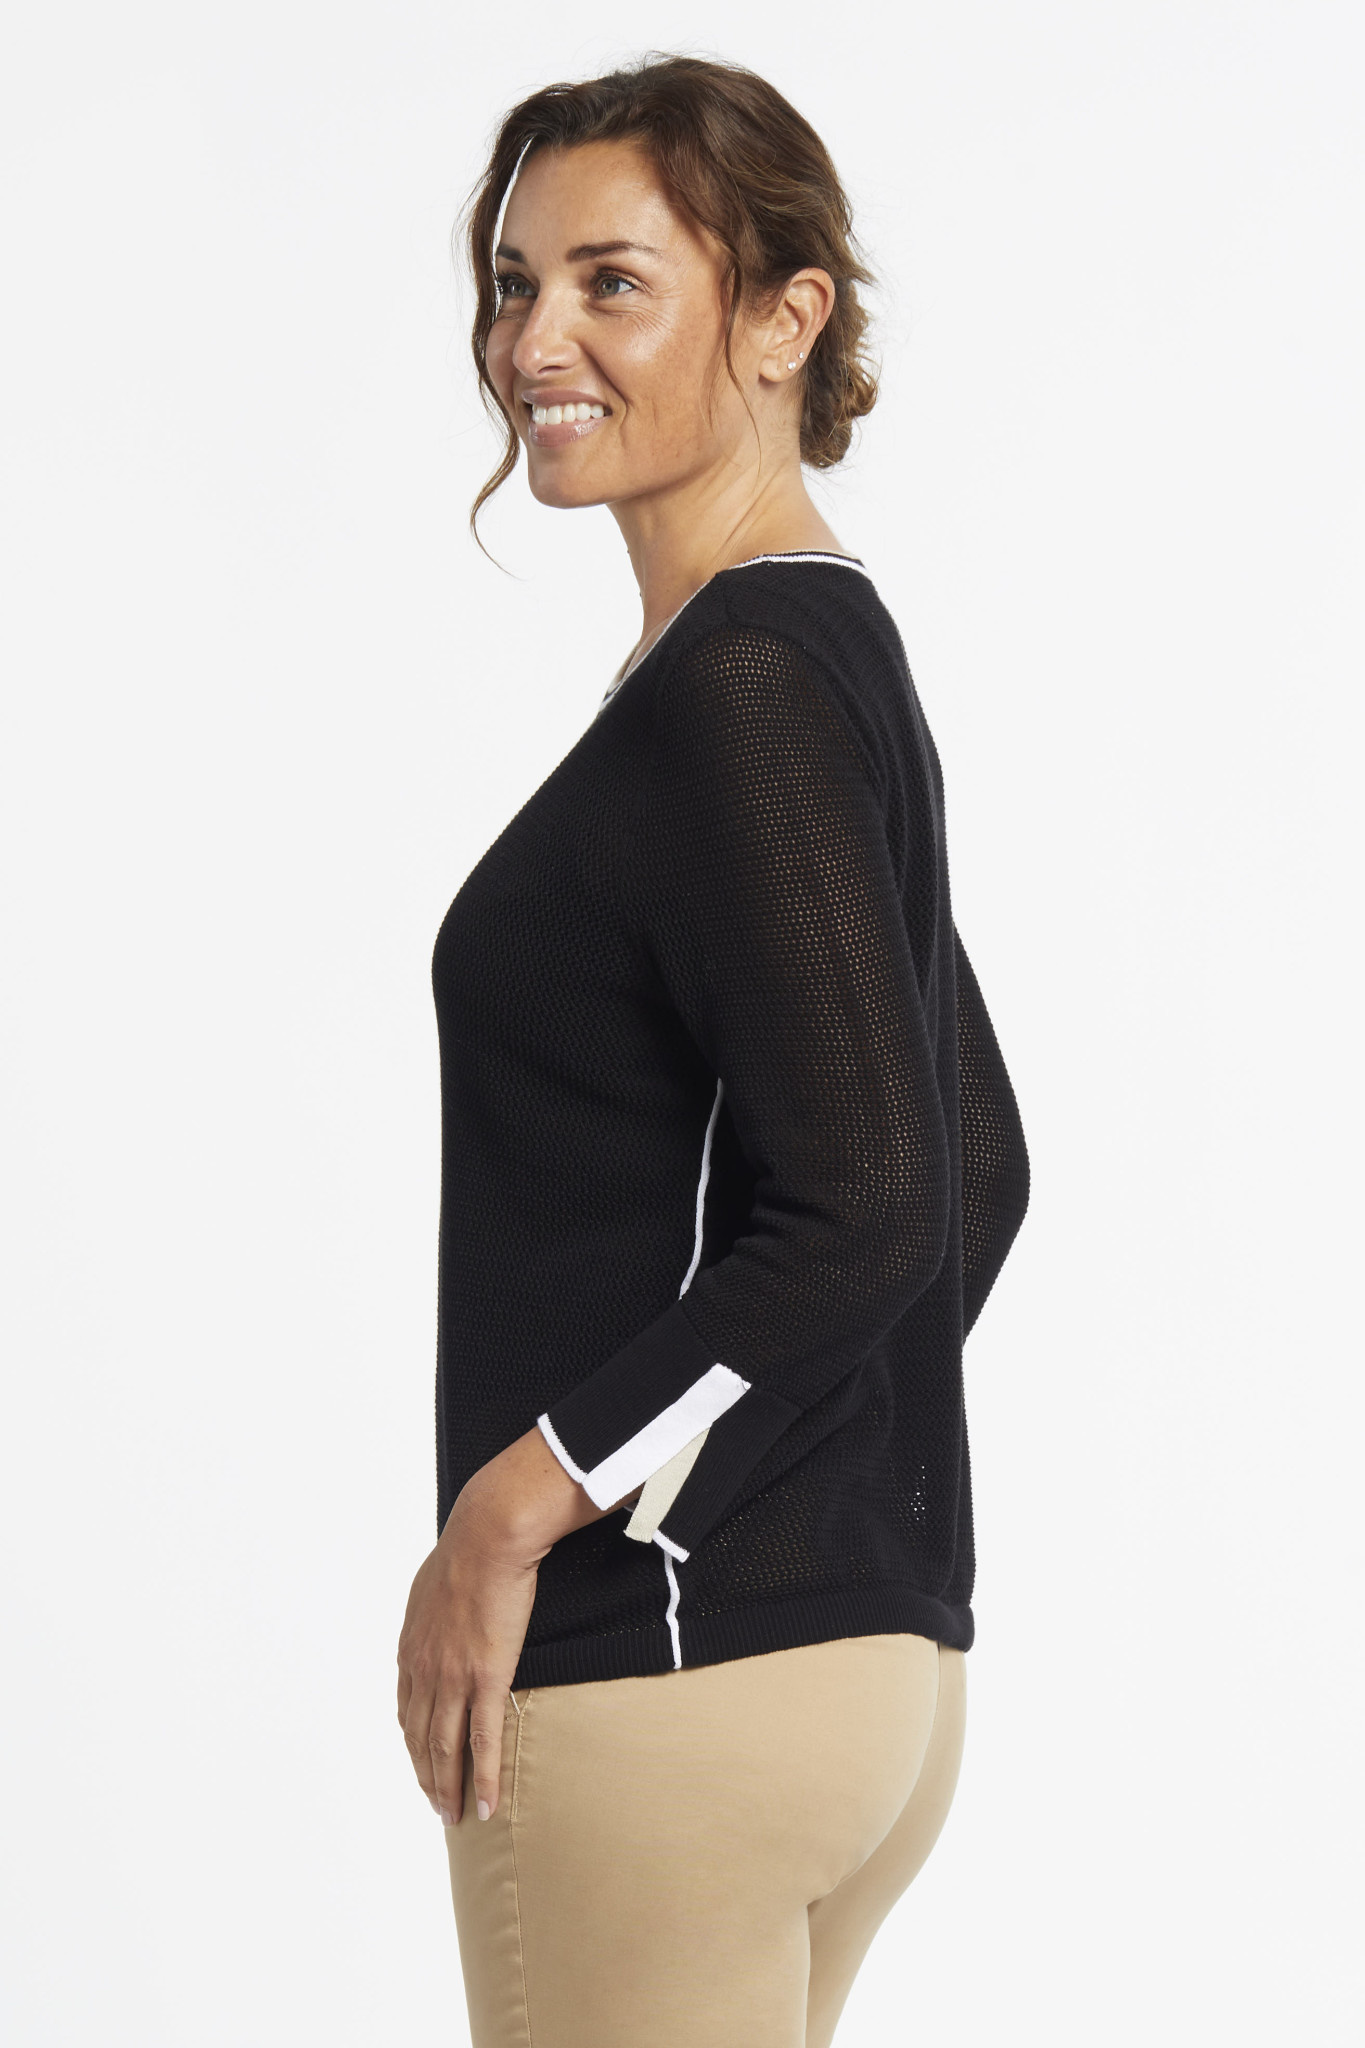 3/4 Sleeve Crew Neck Sweater with Contrast Piping - Black